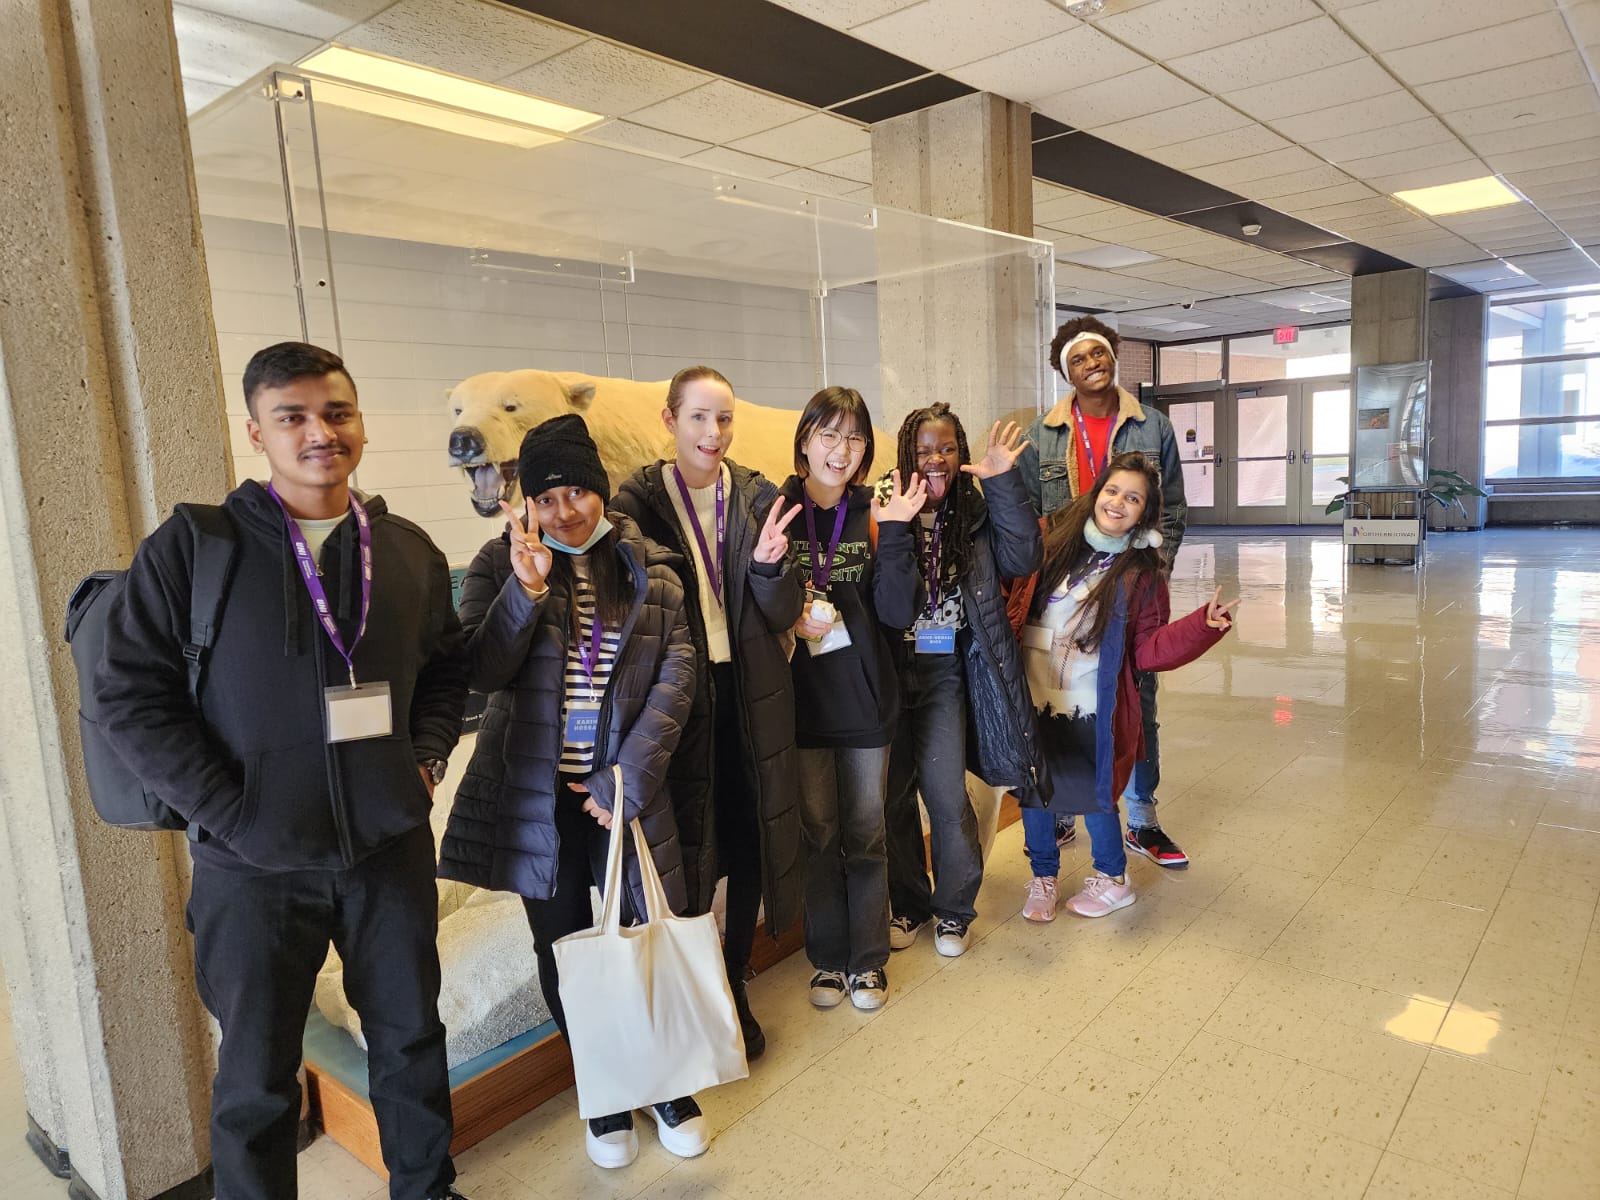 New 2023 international students next to the polar bear display in the ARTIC Center on the UNI campus